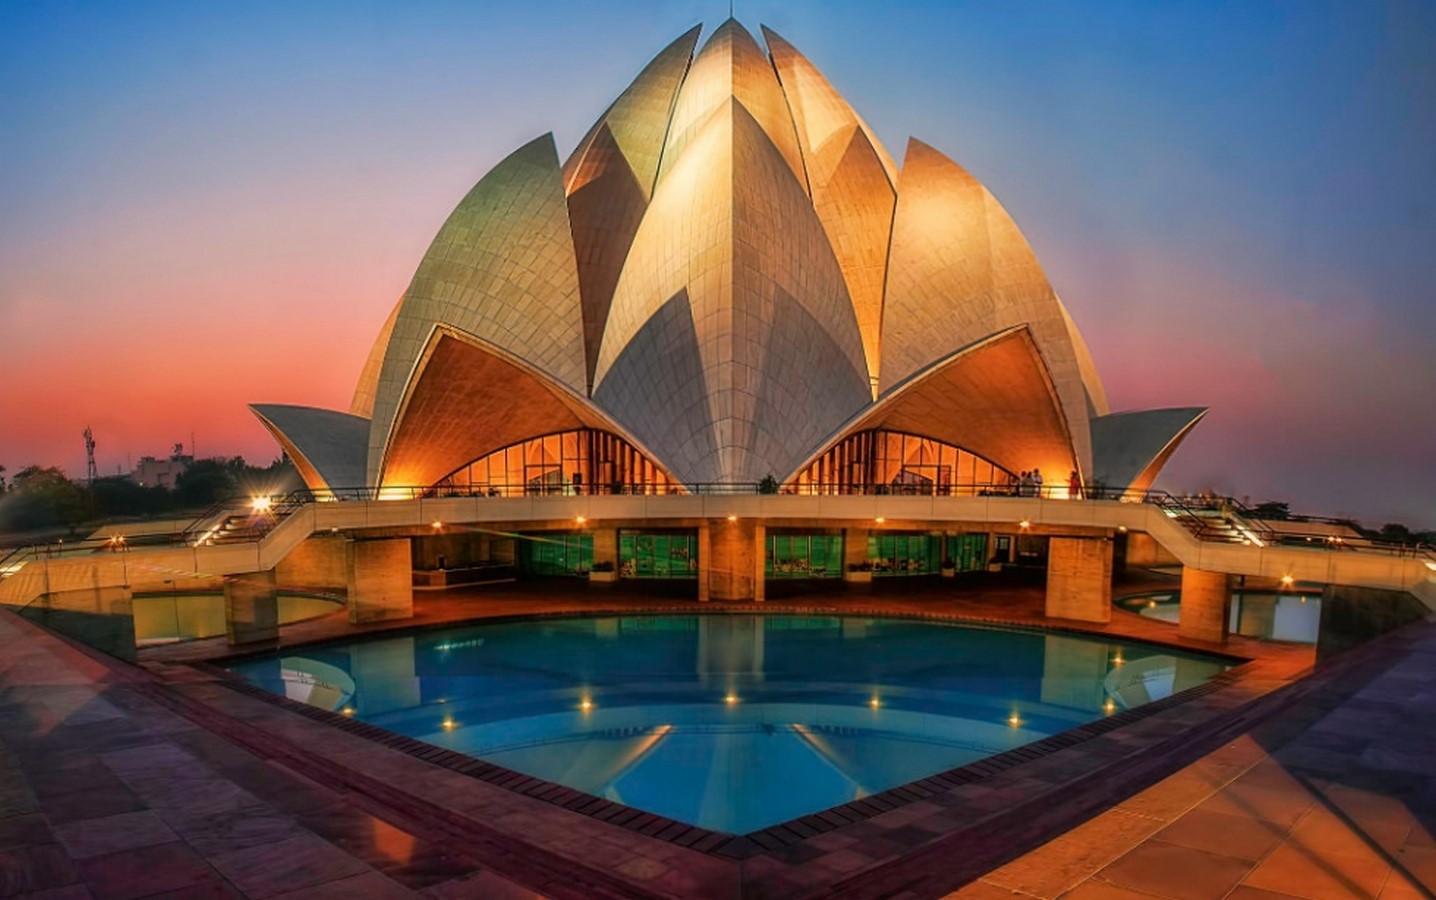 10 Things you did not know about The Lotus Temple - New Delhi - RTF